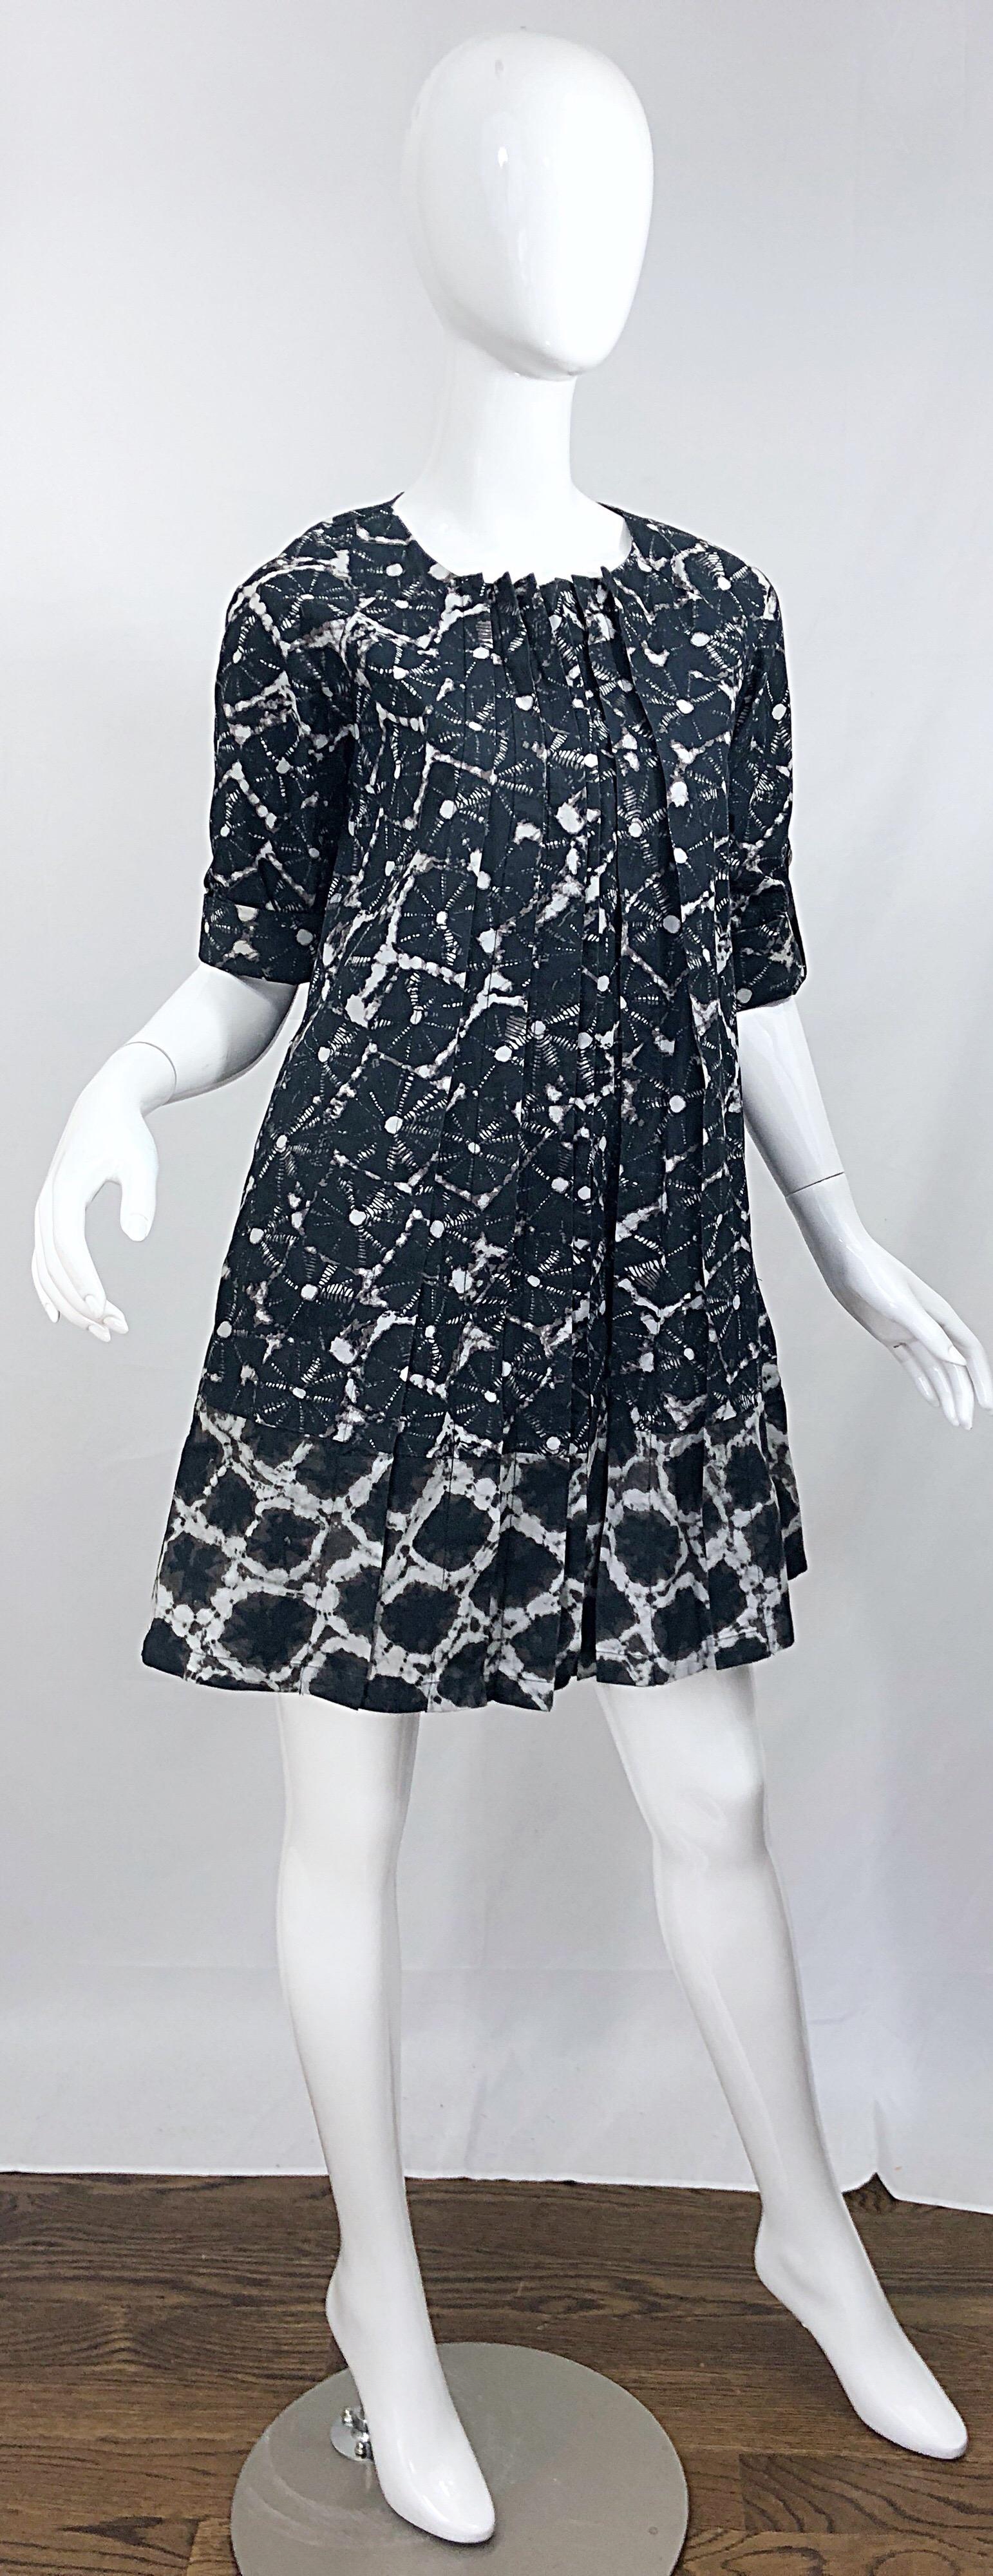 Thakoon Spring 2008 Black White Abstract Tie Dye Trapeze Swing Dress Jacket For Sale 3